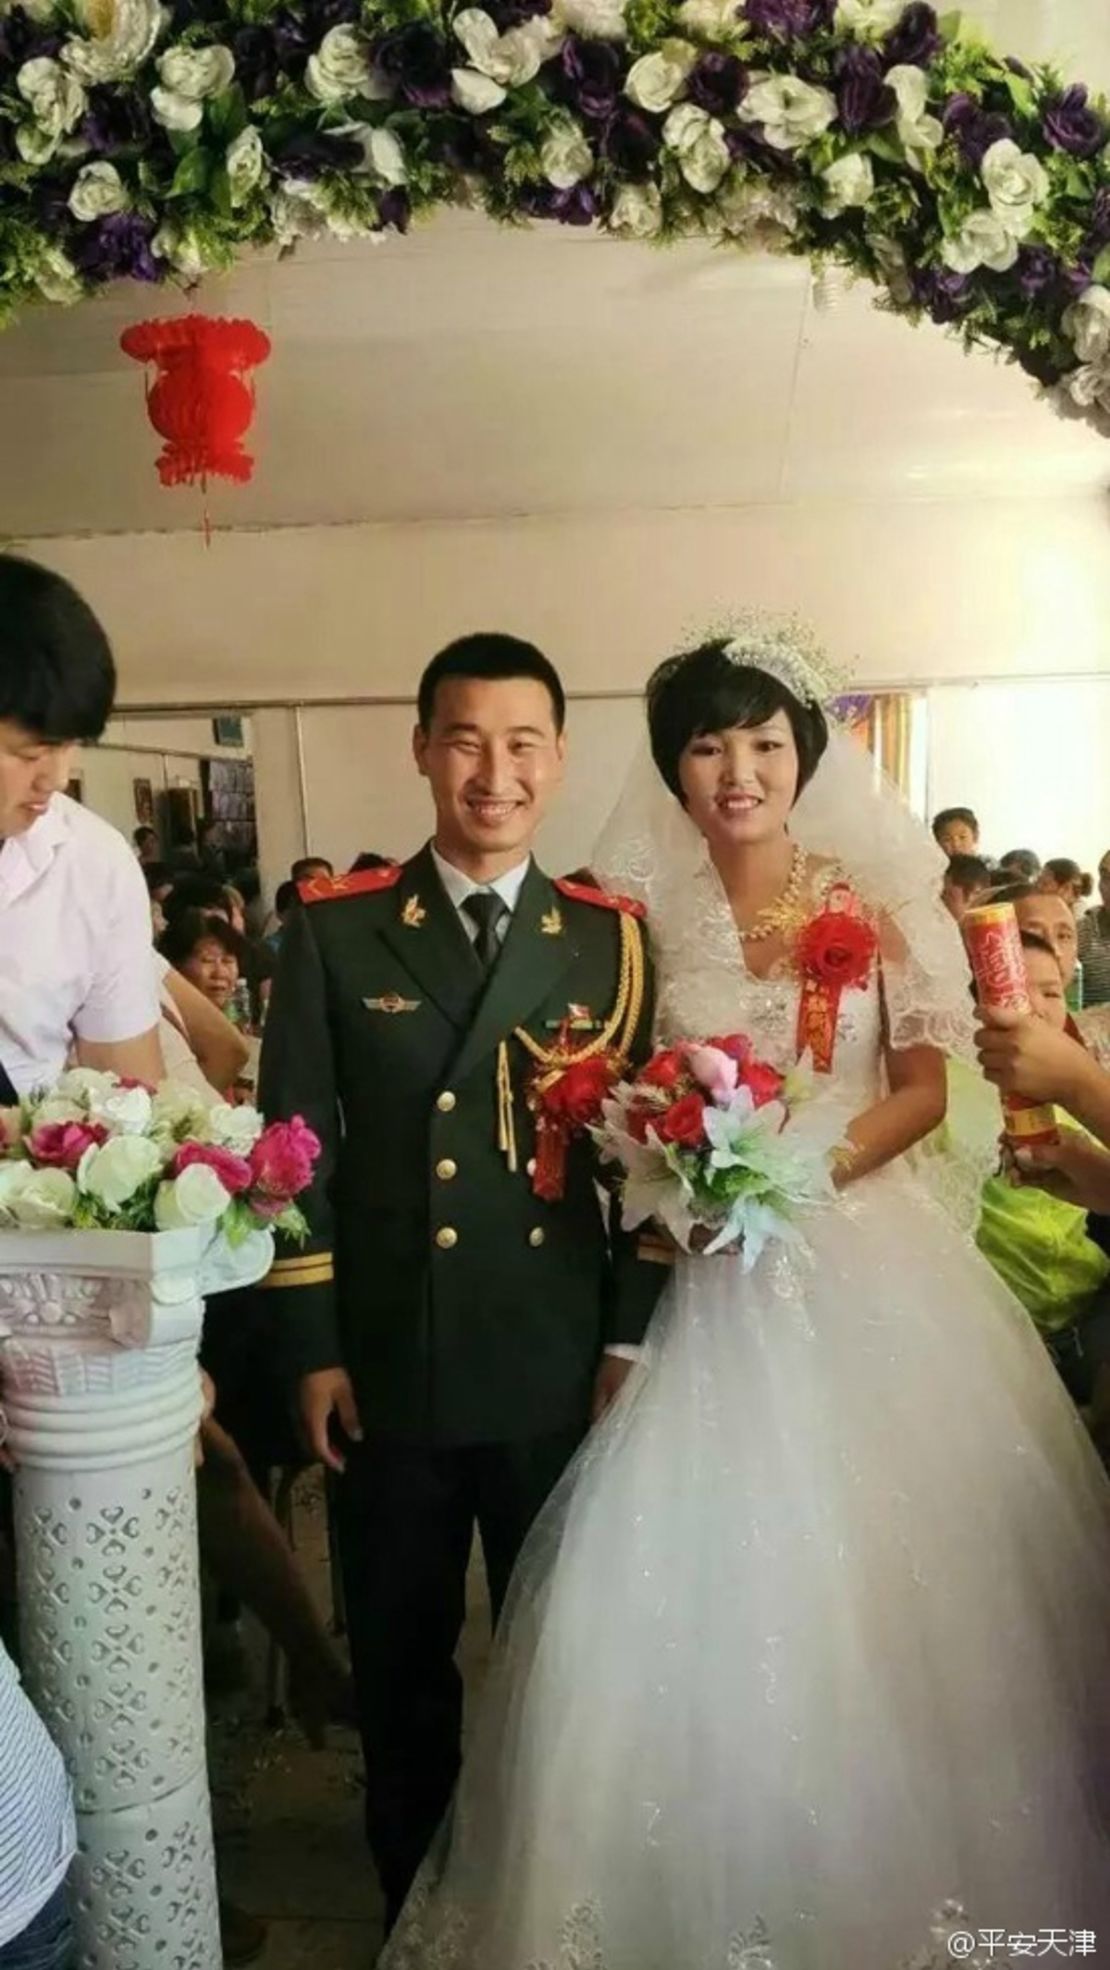 Recently married firefighter Yin Yanrong, 25, was confirmed as being among the dead from the explosions in Tianjin.
